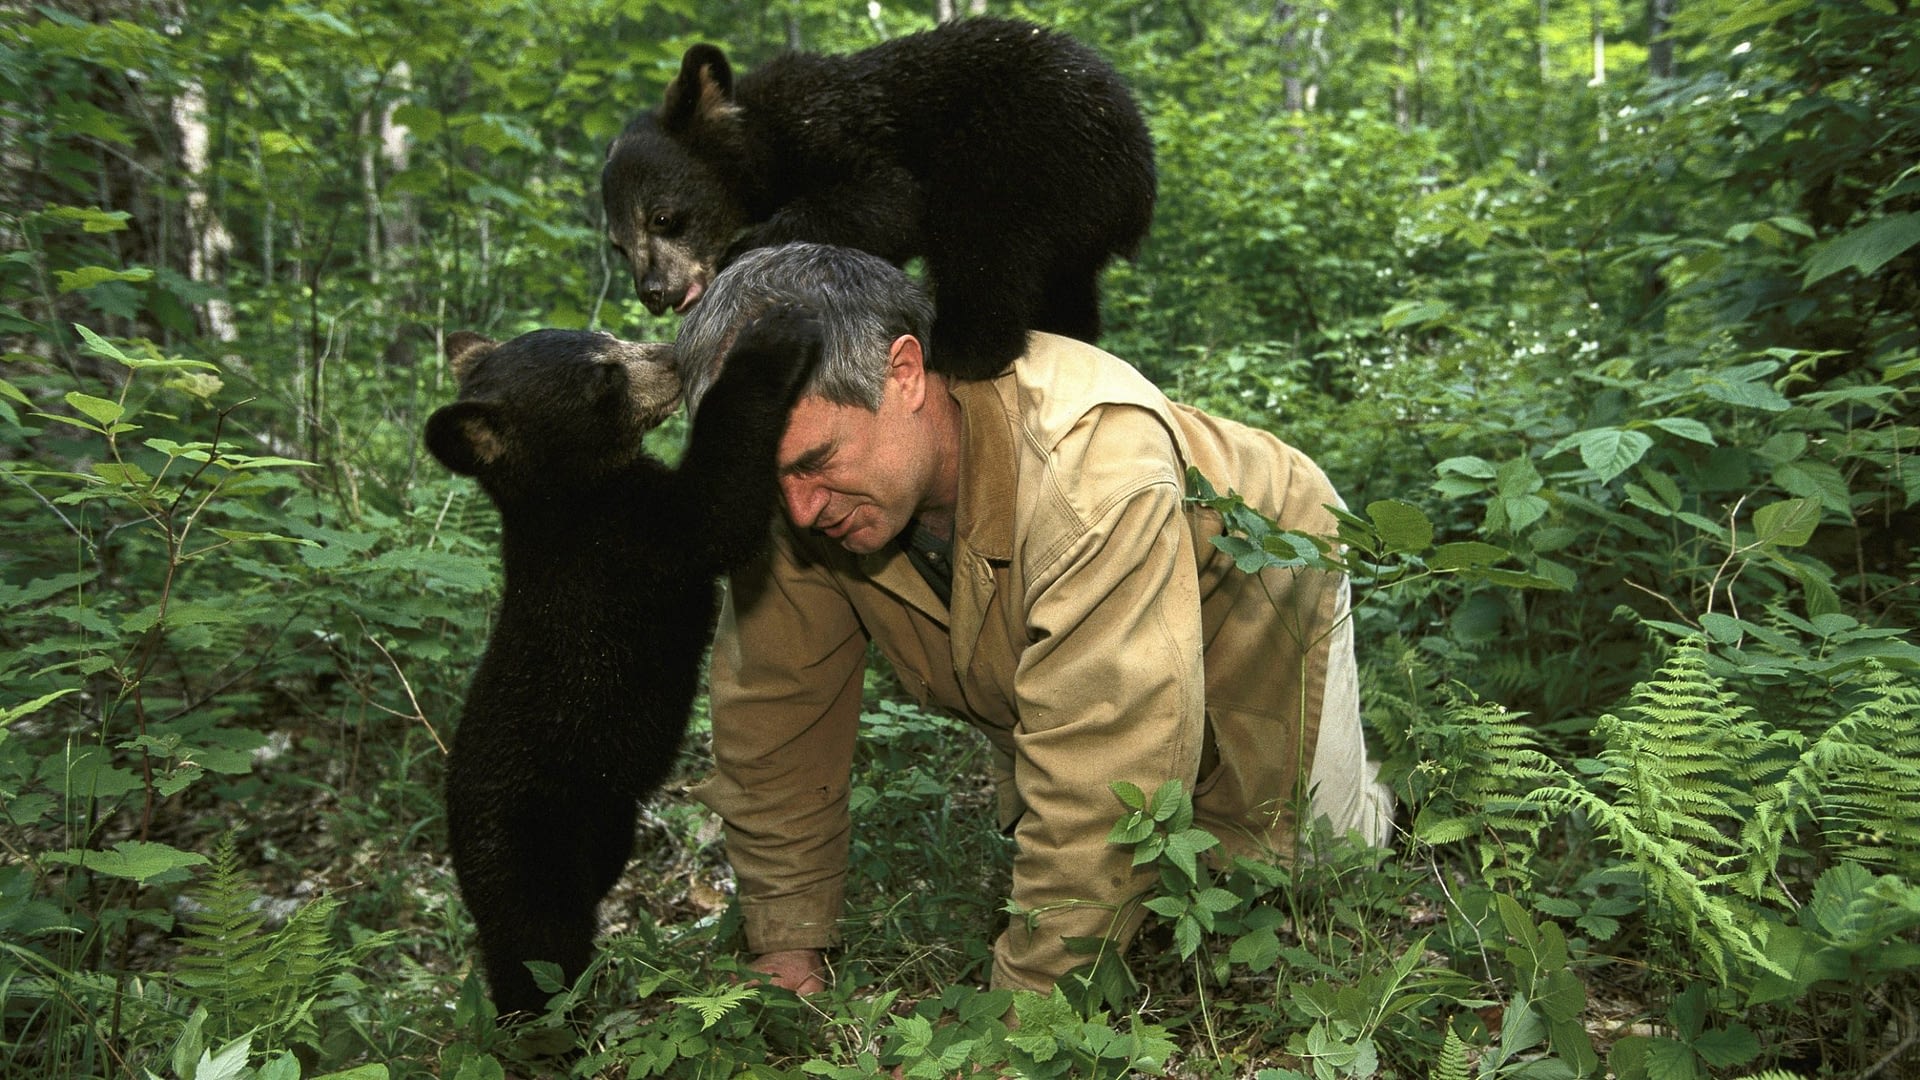 Image: Ben on the ground with two bear cubs playing on top of him